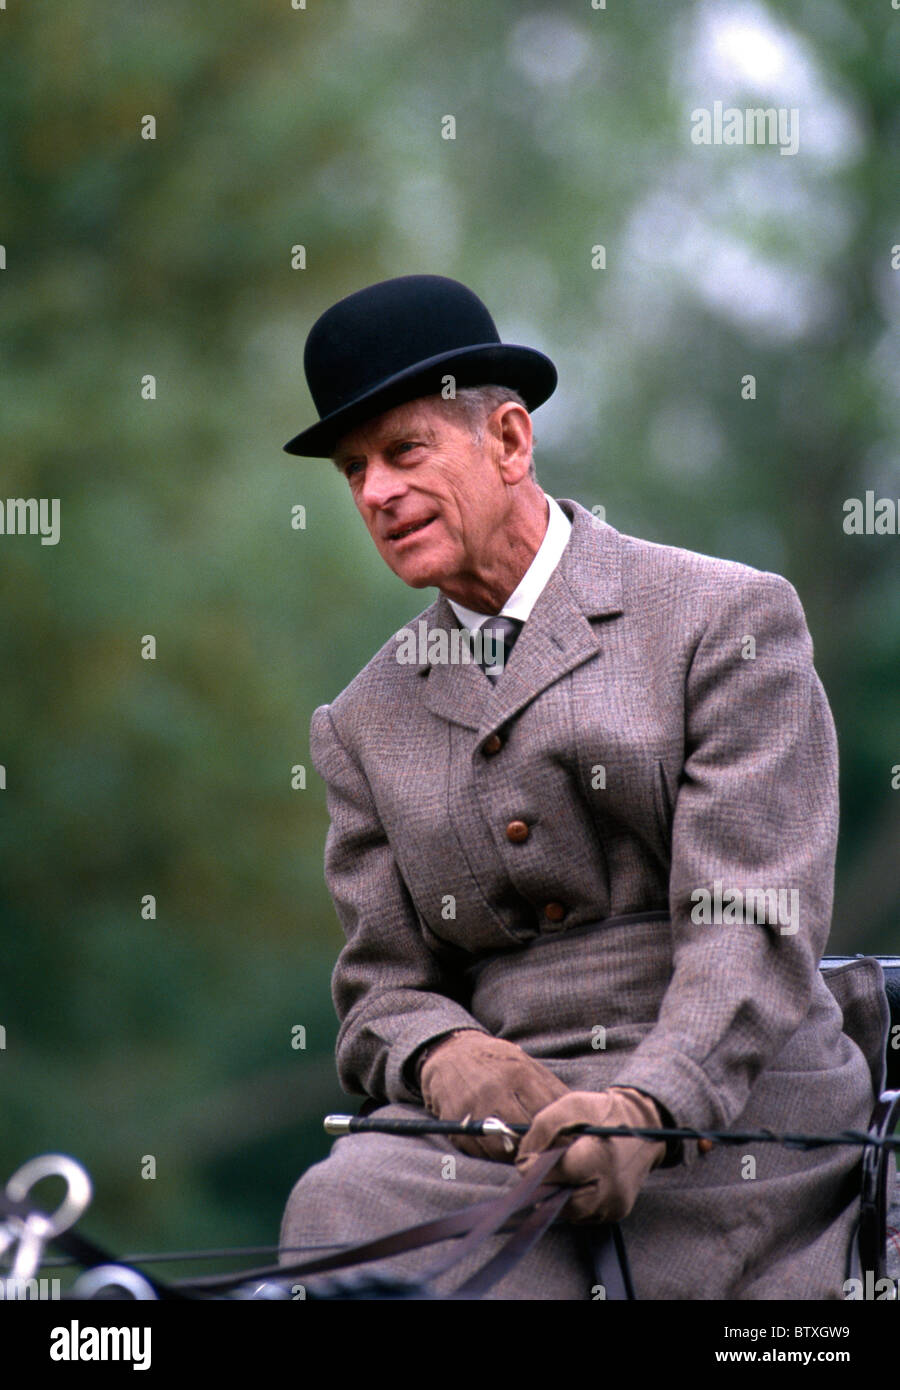 WINDSOR, UNITED KINGDOM - MAY 17: Prince Philip At the Windsor Horse Show on May 17, 1992. Stock Photo